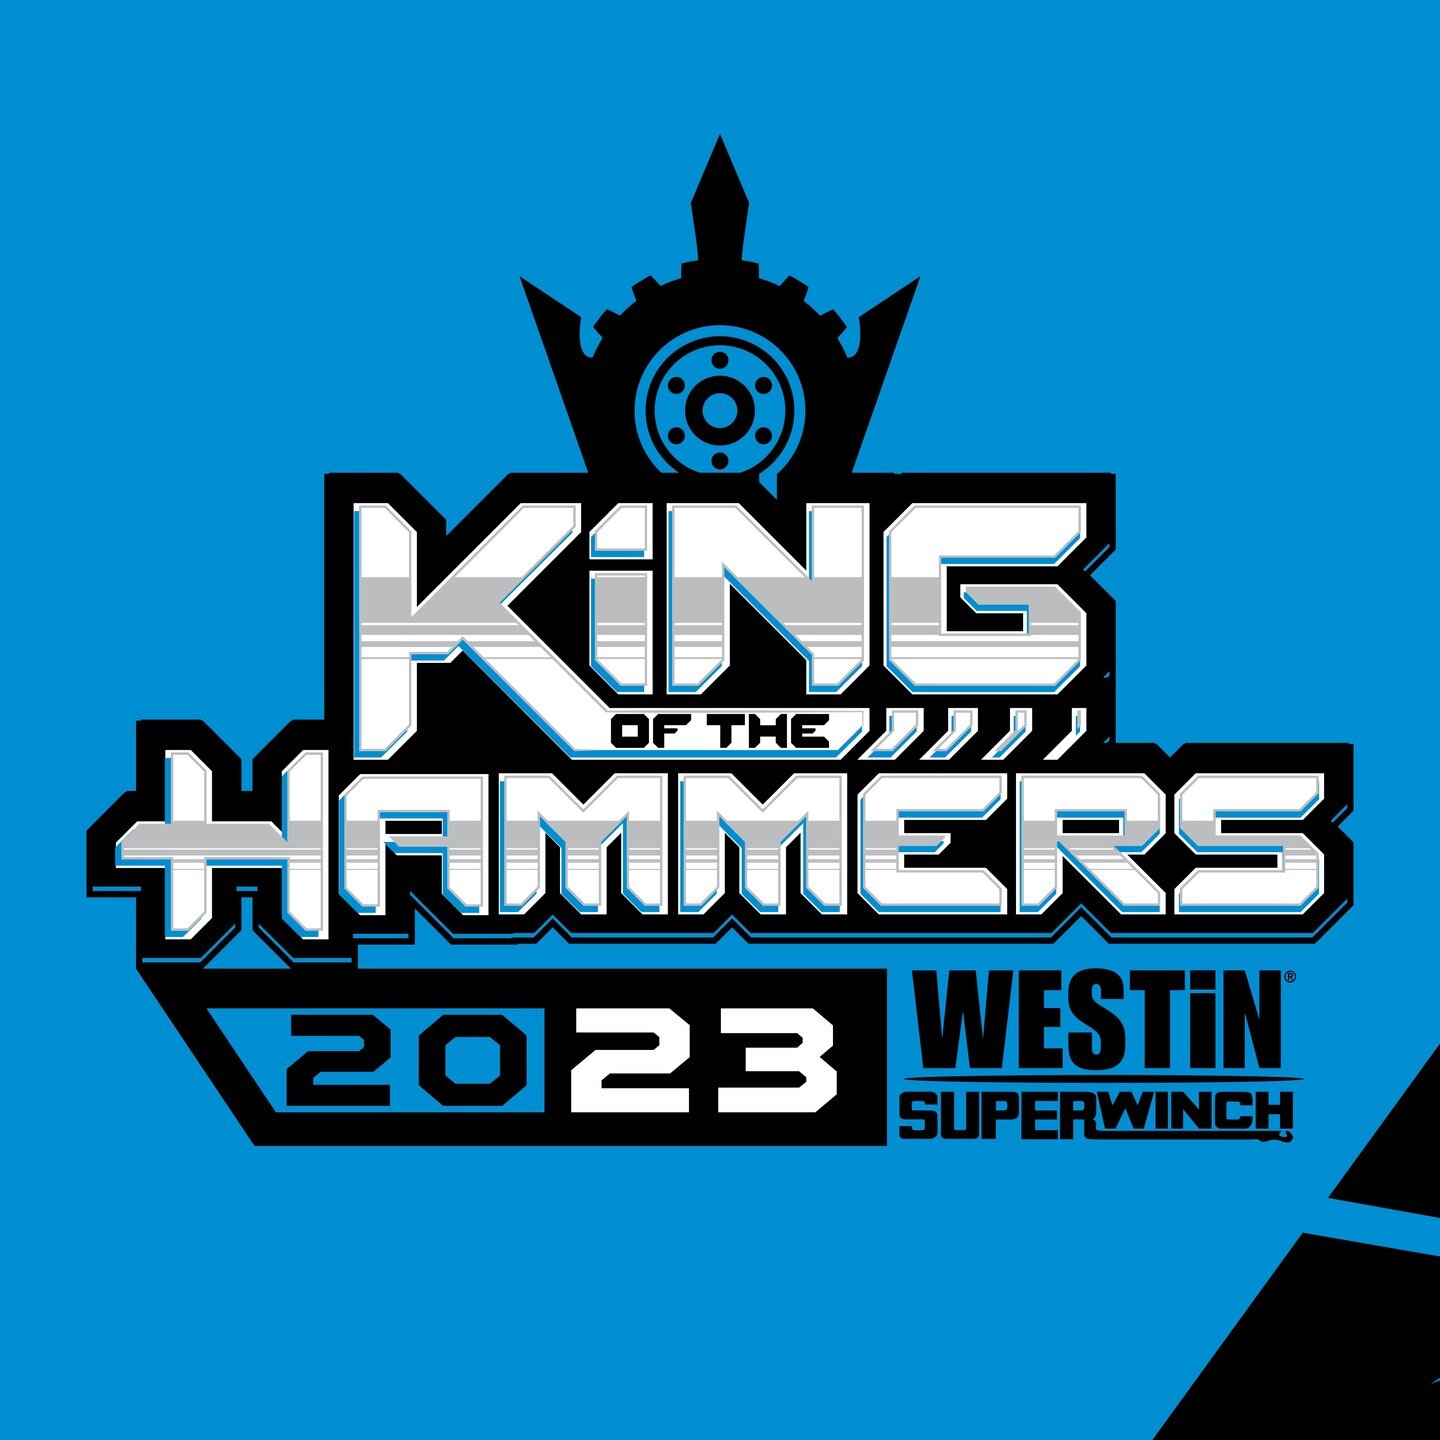 King of the Hammers 2023 Event Graphic for @westinautomotive 
#illustration #graphicdesign #graphicsdesign #designgraphic #designergraphic #graphicaldesign #art #Offroad #desert #studiowork #inspiration